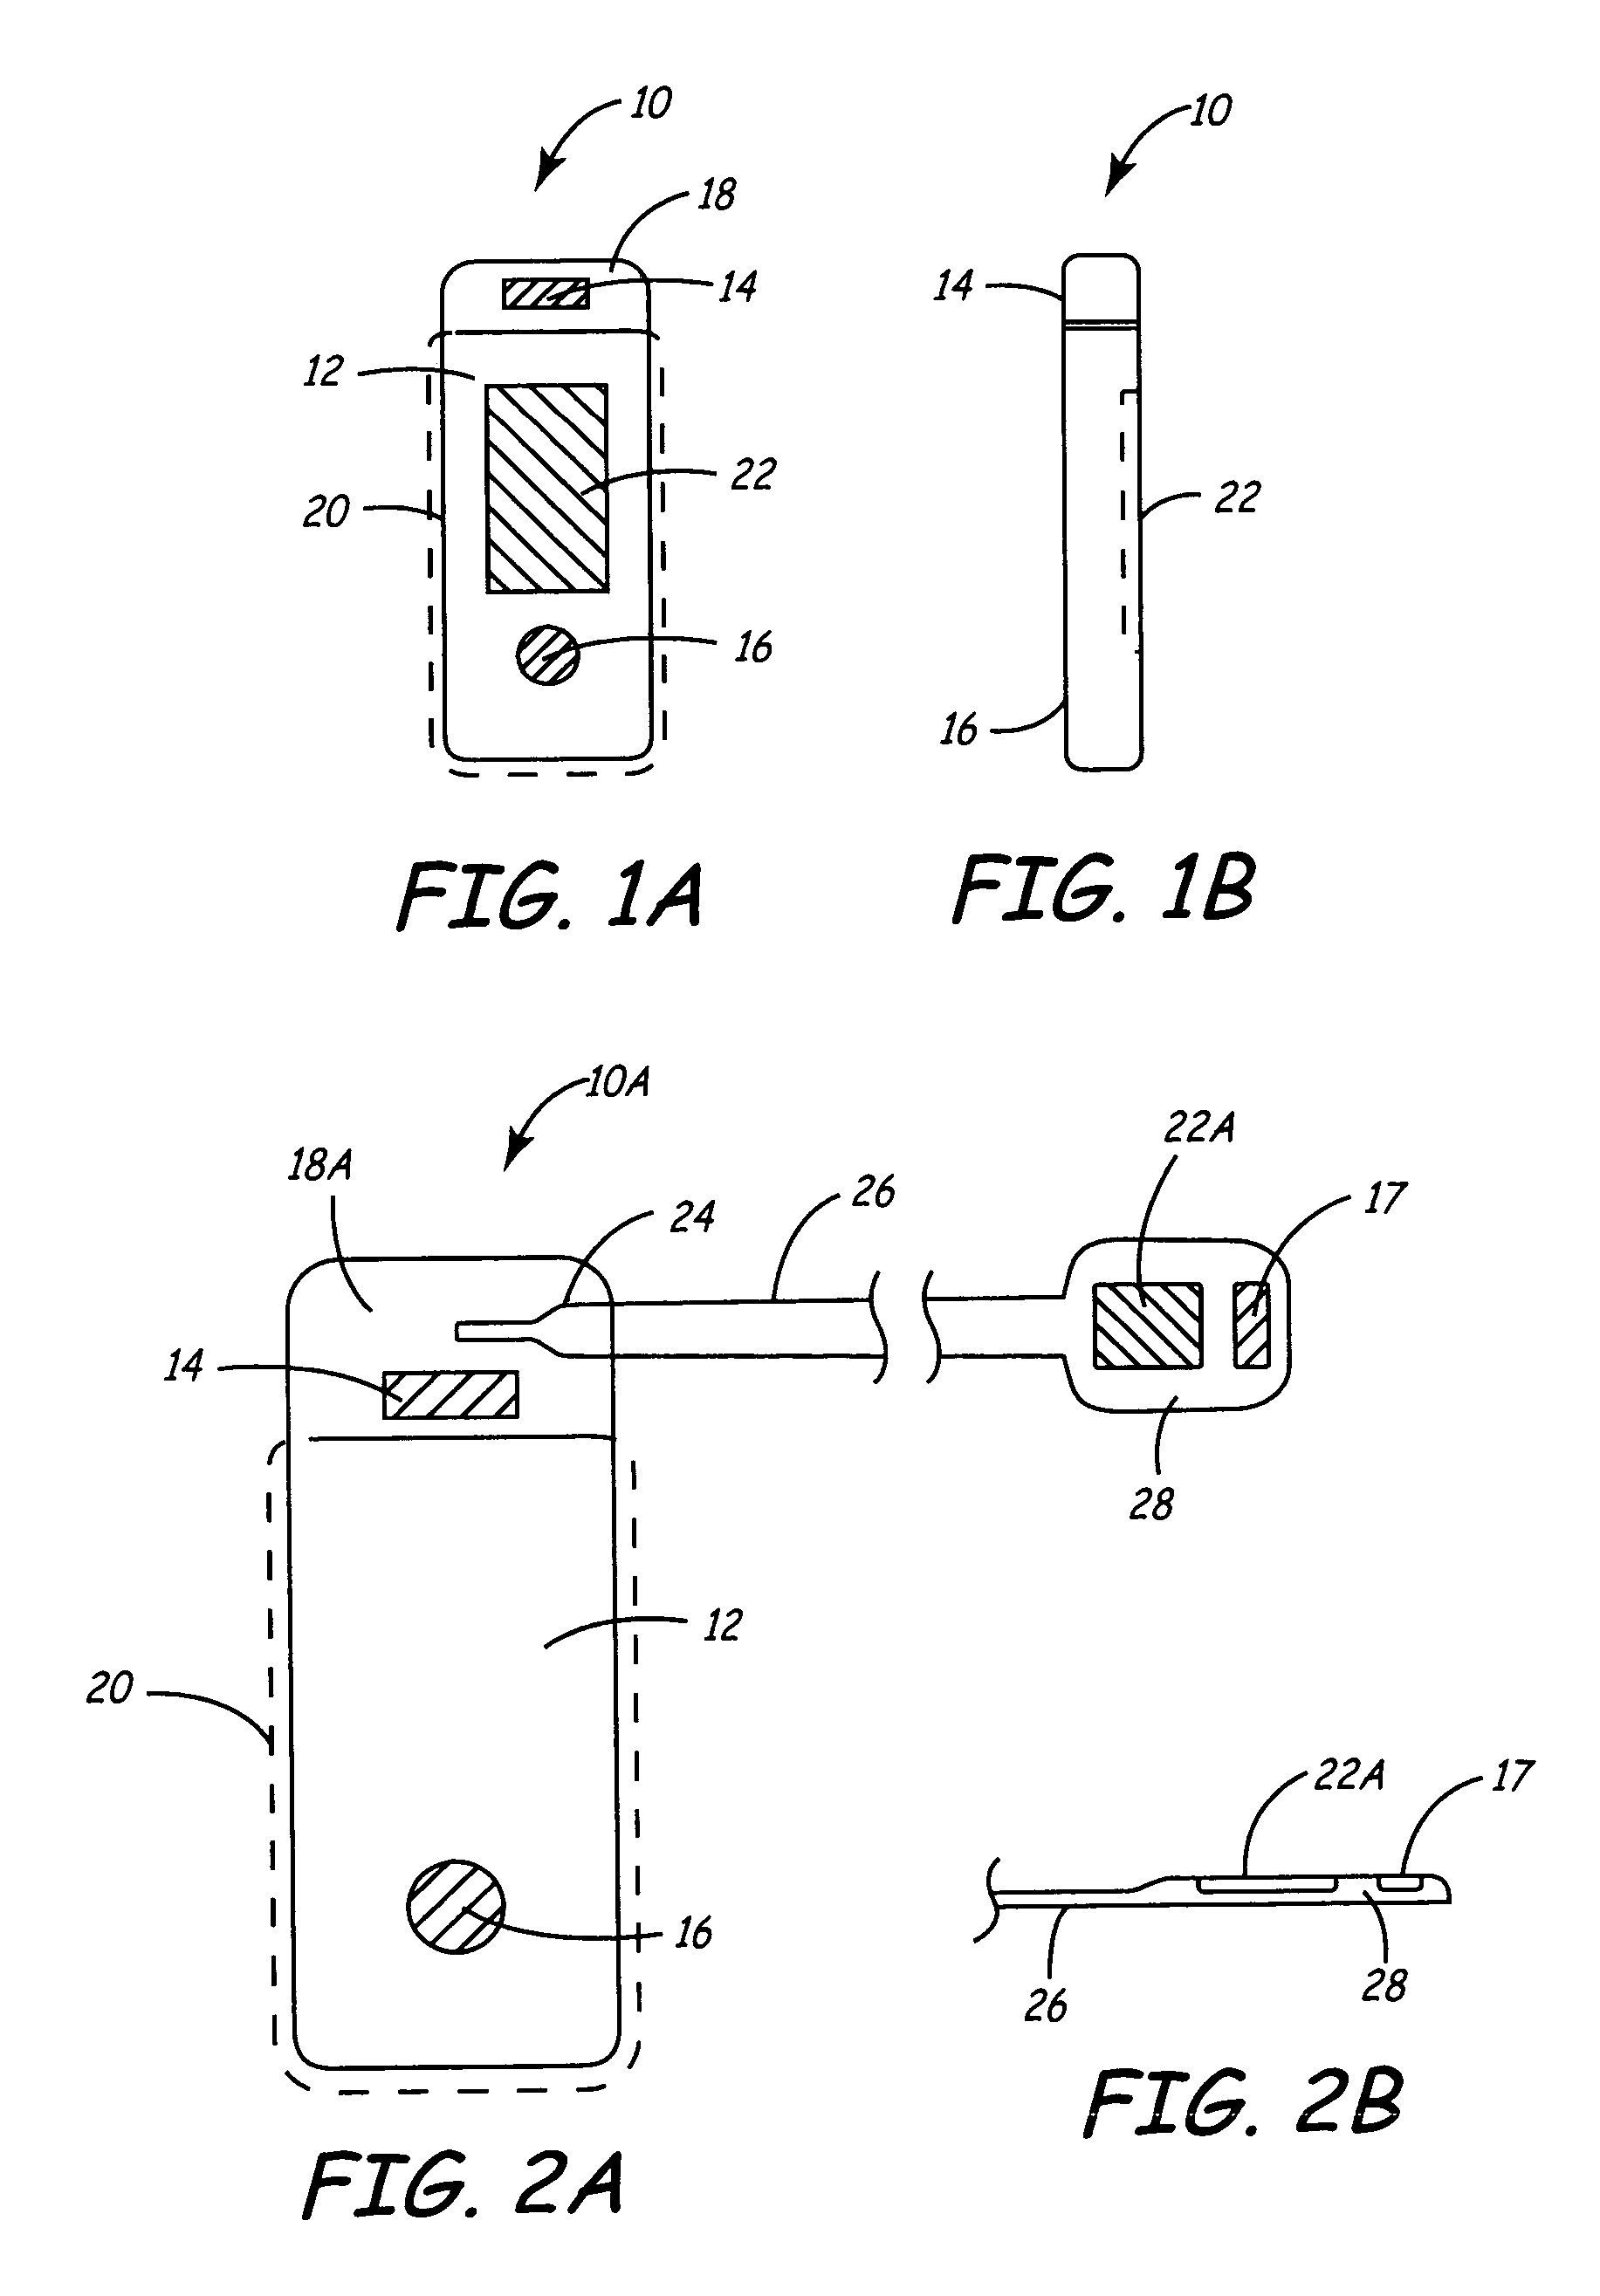 Method and apparatus for monitoring heart function in a subcutaneously implanted device